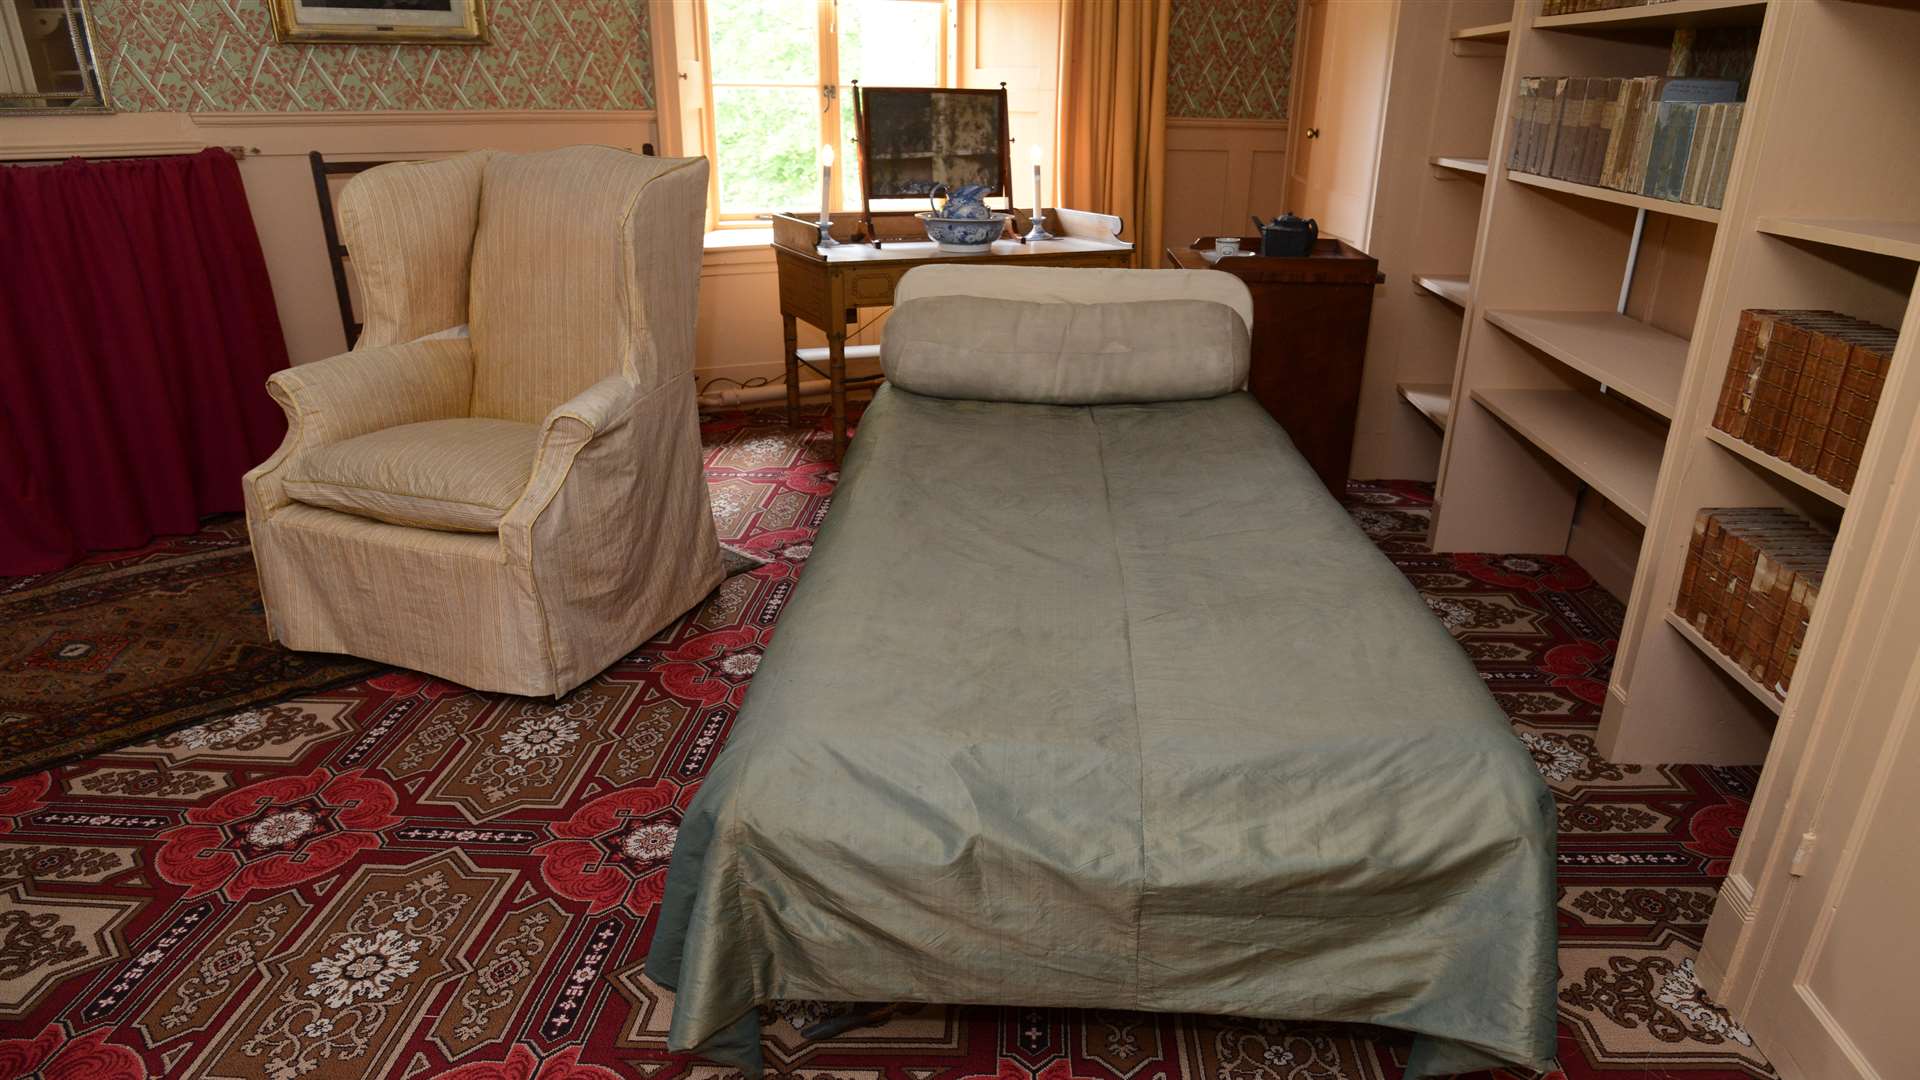 For the first time since 1934, the duke’s bedroom has been re-imagined